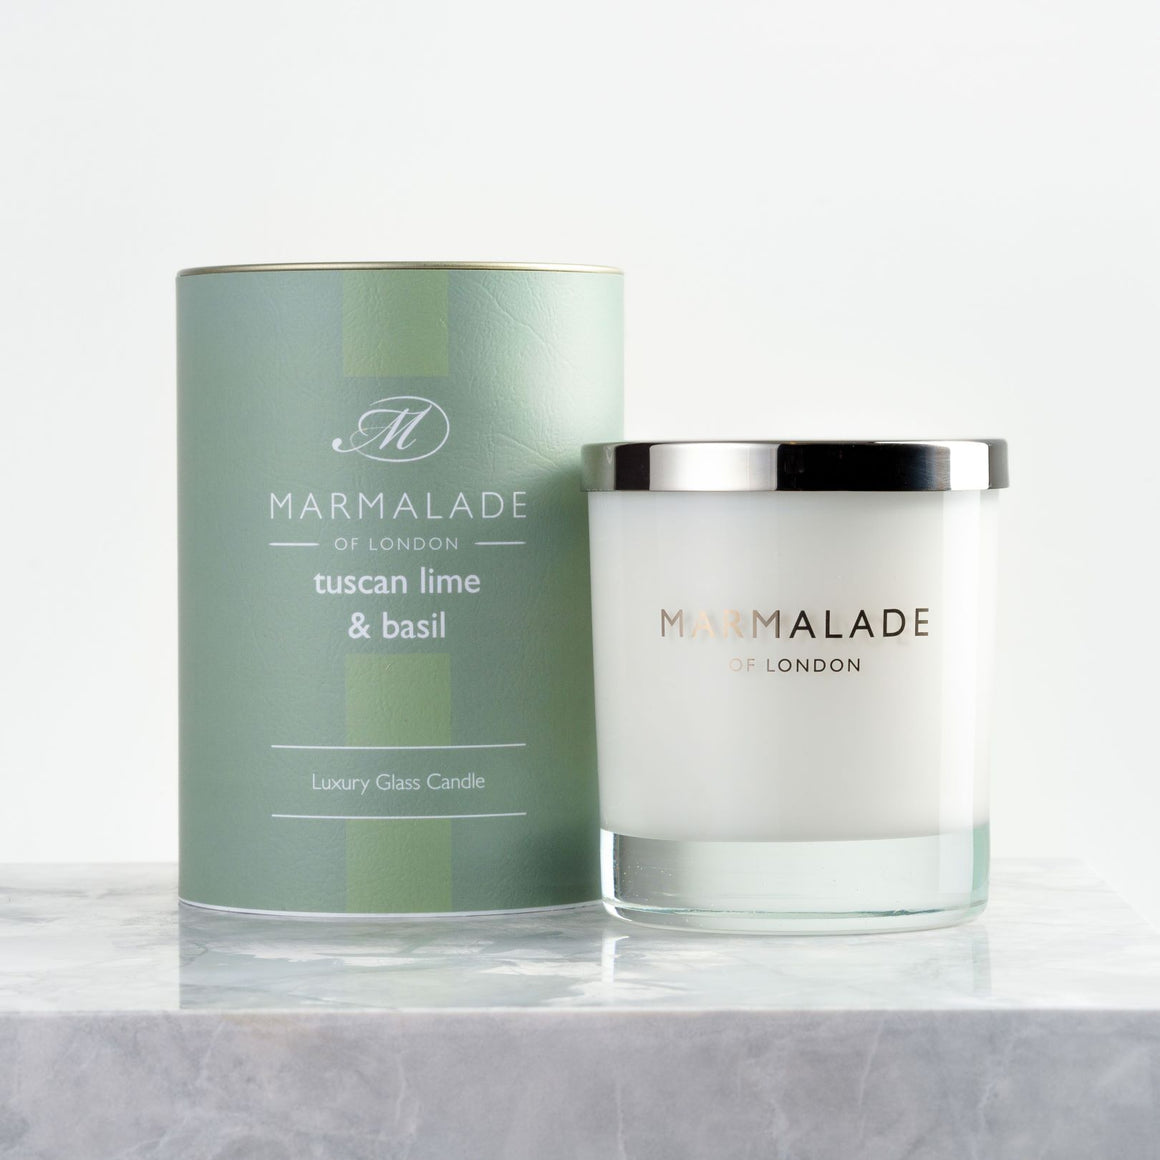 Marmalade of London Tuscan Lime & Basil Large Glass Candle, with  Base notes: Floral, Basil, Patchouli, Amber, Musk & Moss. Top notes: Mandarin, Lime, Grapefruit, Lemon and Spearmint. 